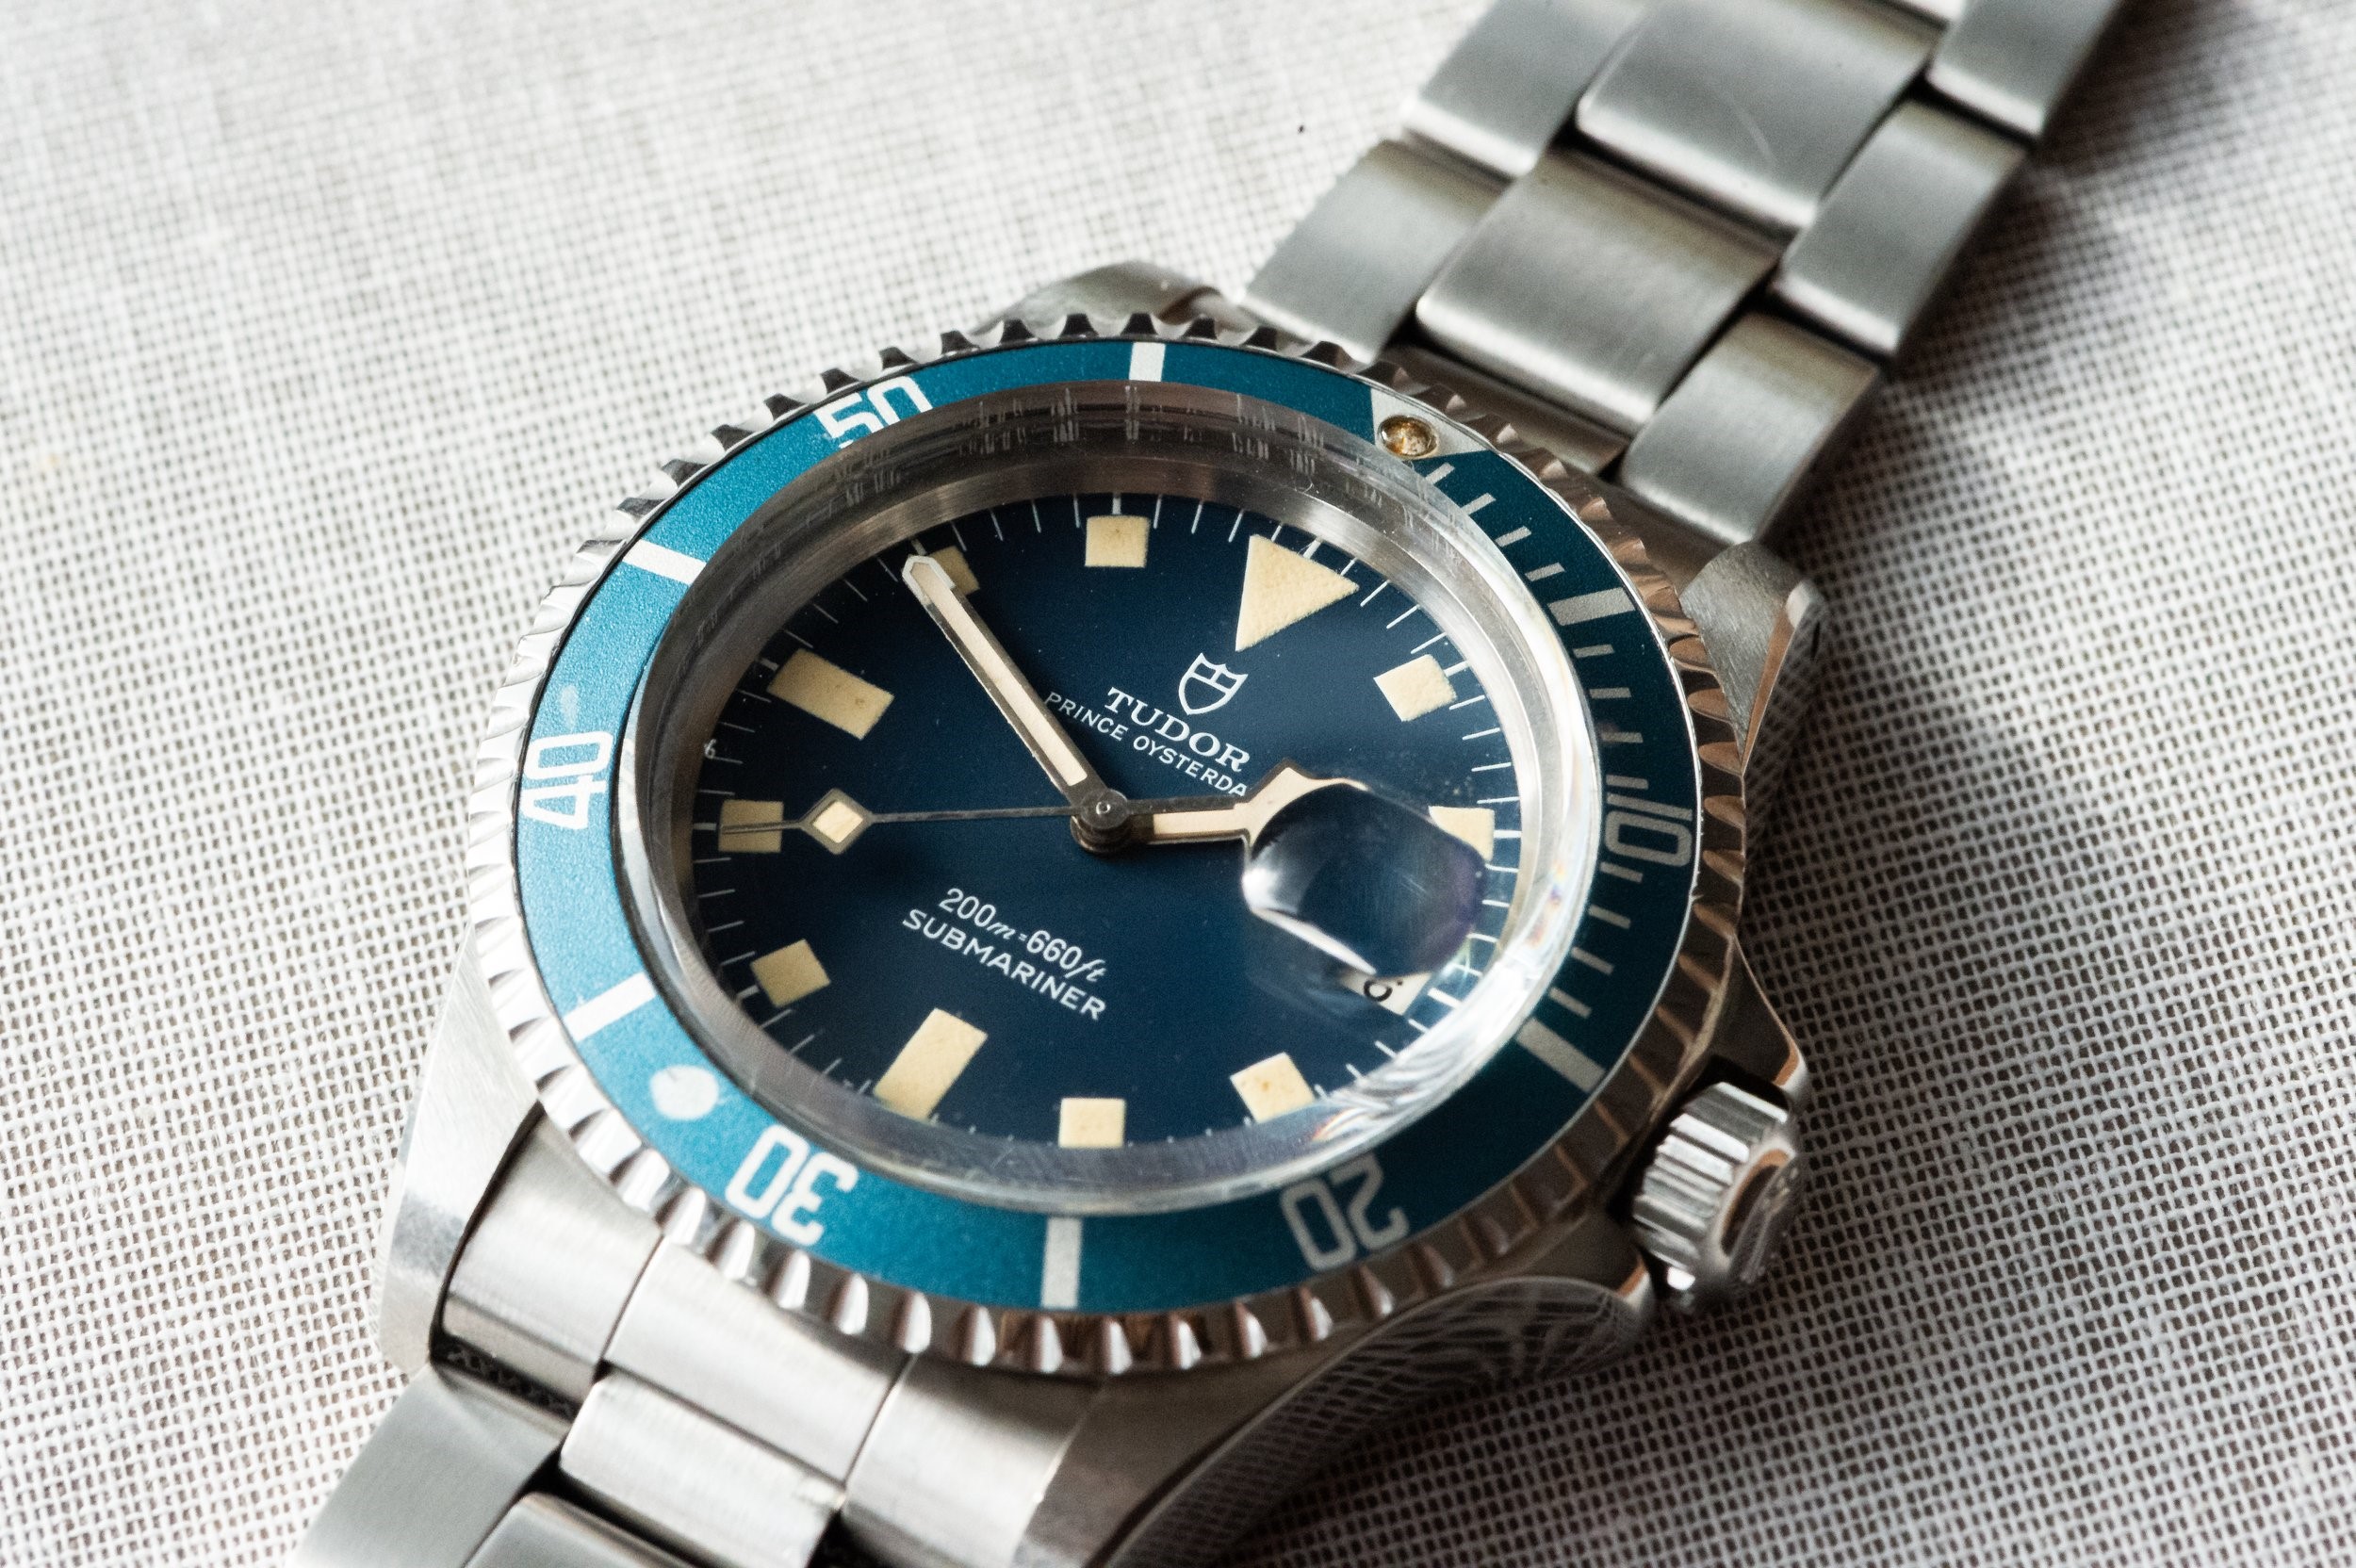 VINTAGE TUDOR SUBMARINER 'SNOWFLAKE' 9411/0 BOX AND PAPERS 1982 - Image 4 of 4